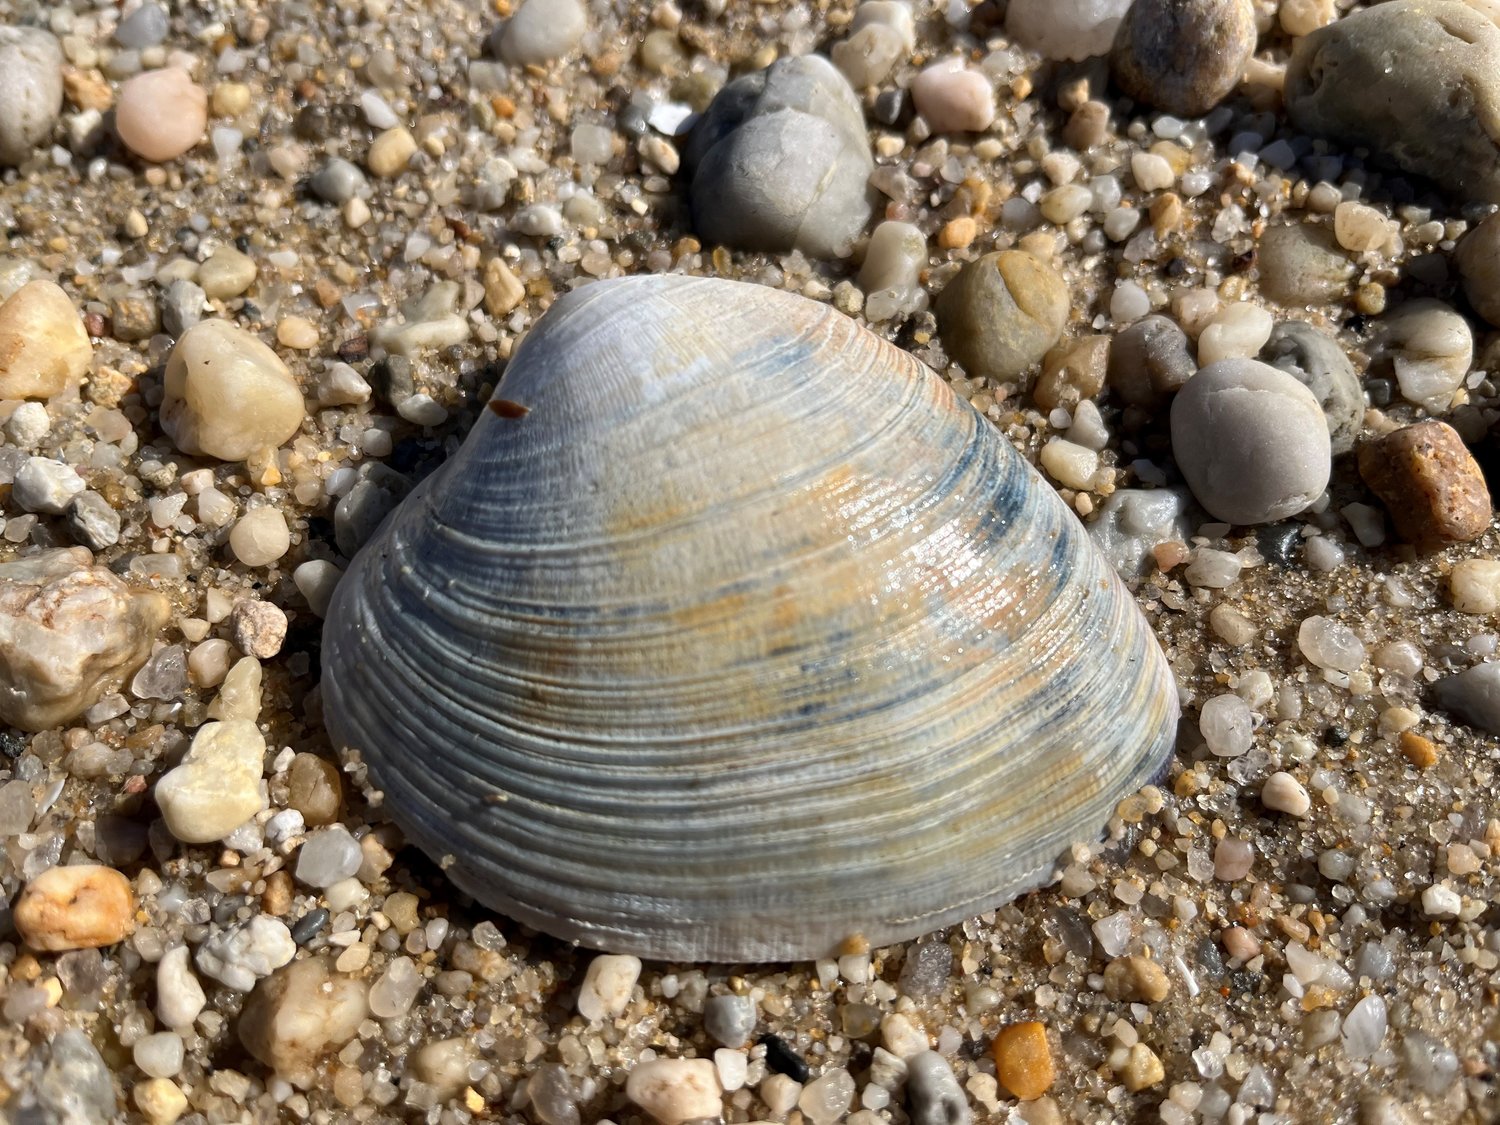 Counting the darker rings on the shell can provide an estimate of how old the clam is.